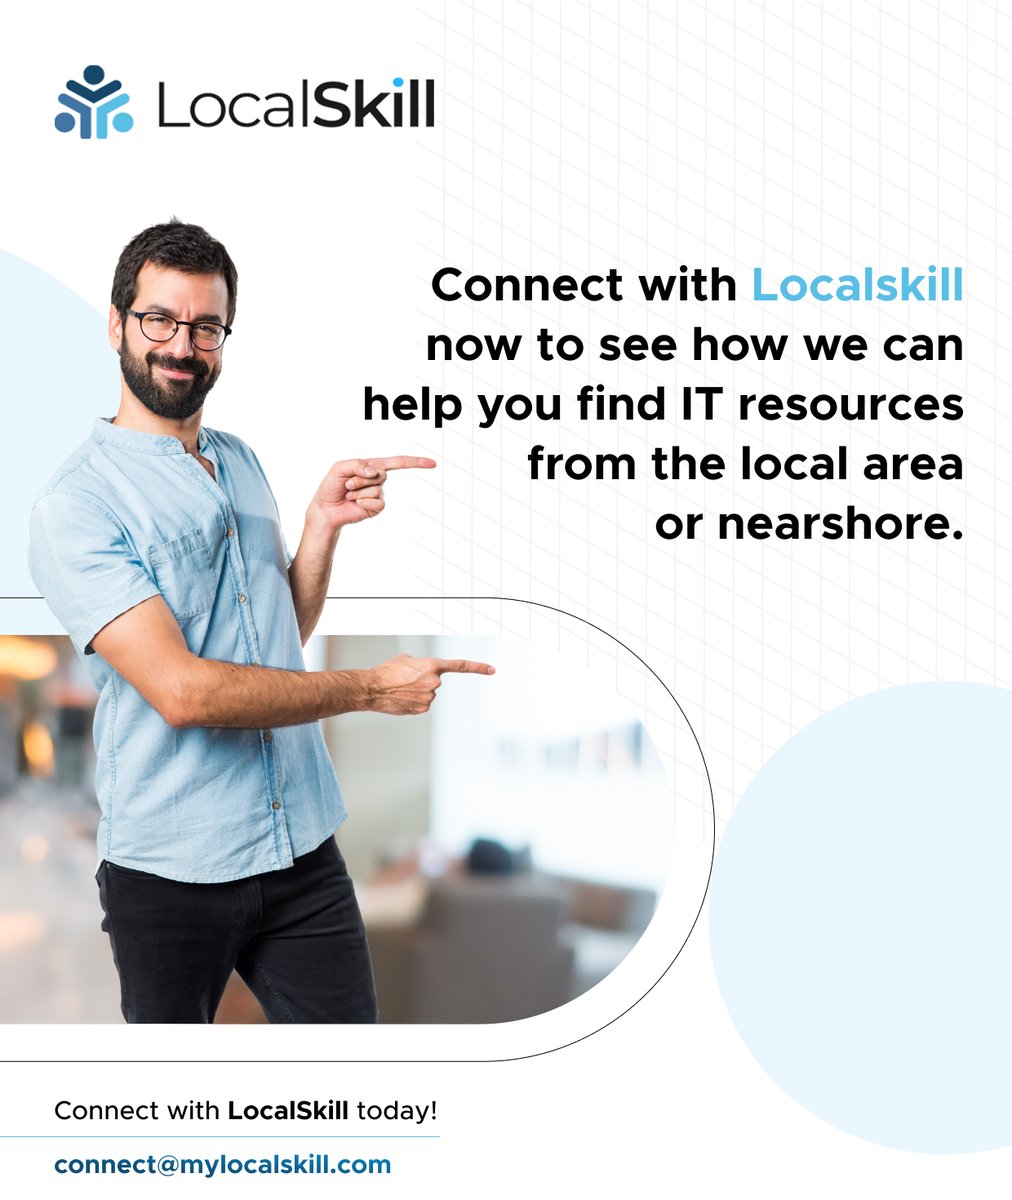 #IT #ITJobs #ITSpecialist #ITExperts #ITstaffing #developers #ITServices #ITRecruiters #ITprofessionals #Engineering #manufacturing #Automative #Accounting #Recruiters #Recruiting #hiring #staffing #Recruitment #Employment #Canada 🇨🇦 #USA 🇺🇸
Visit: mylocalskill.com